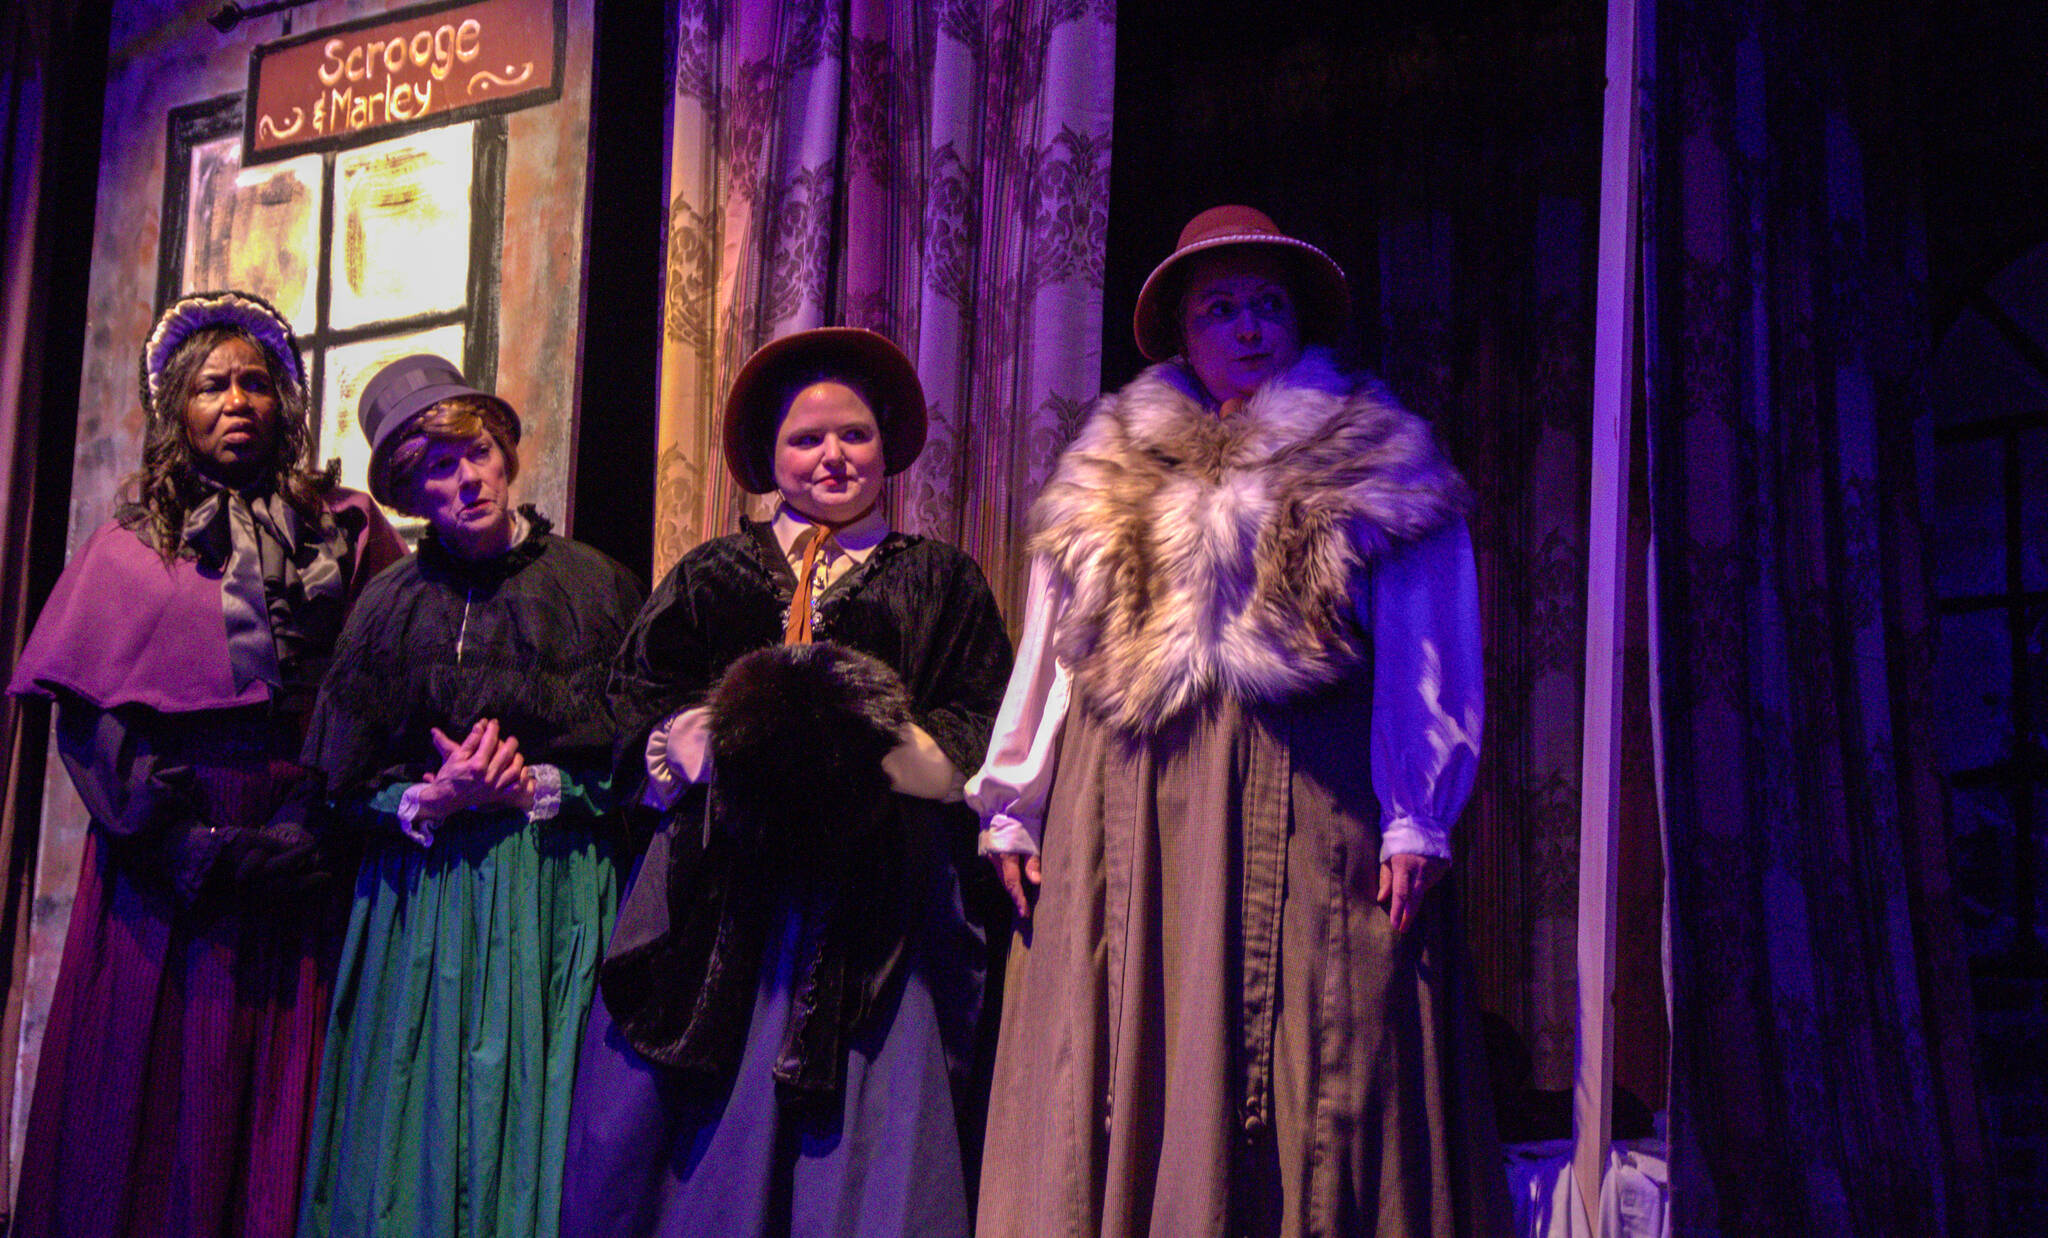 The four madrigals (played by Allenda Jenkins, Geri Thomas, Ellie Alexander and Susan Larsen) watch Scrooge act unpleasantly. (Photo by Luisa Loi)